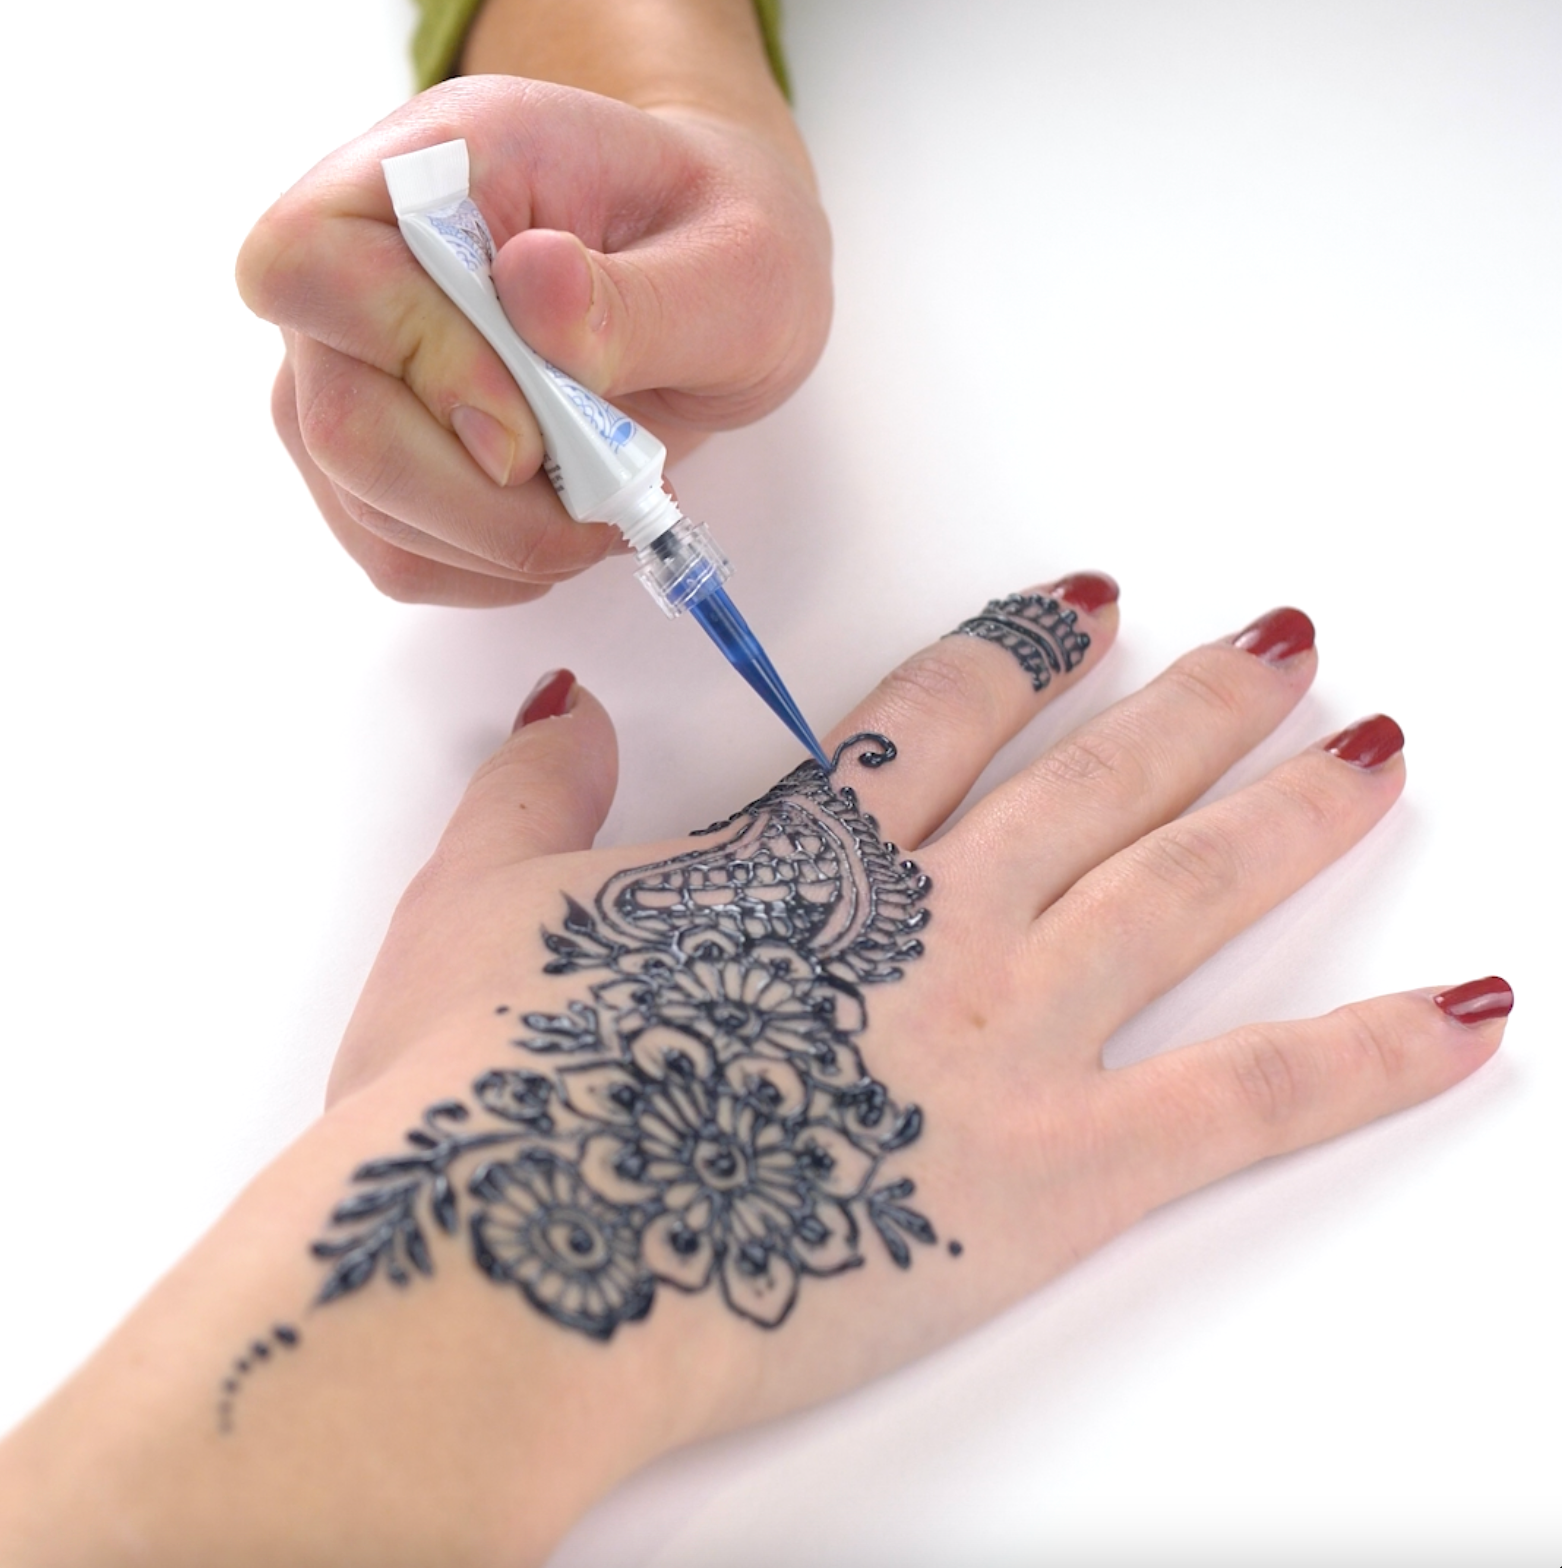 How to clean smudged tattoo ink from practice skin 